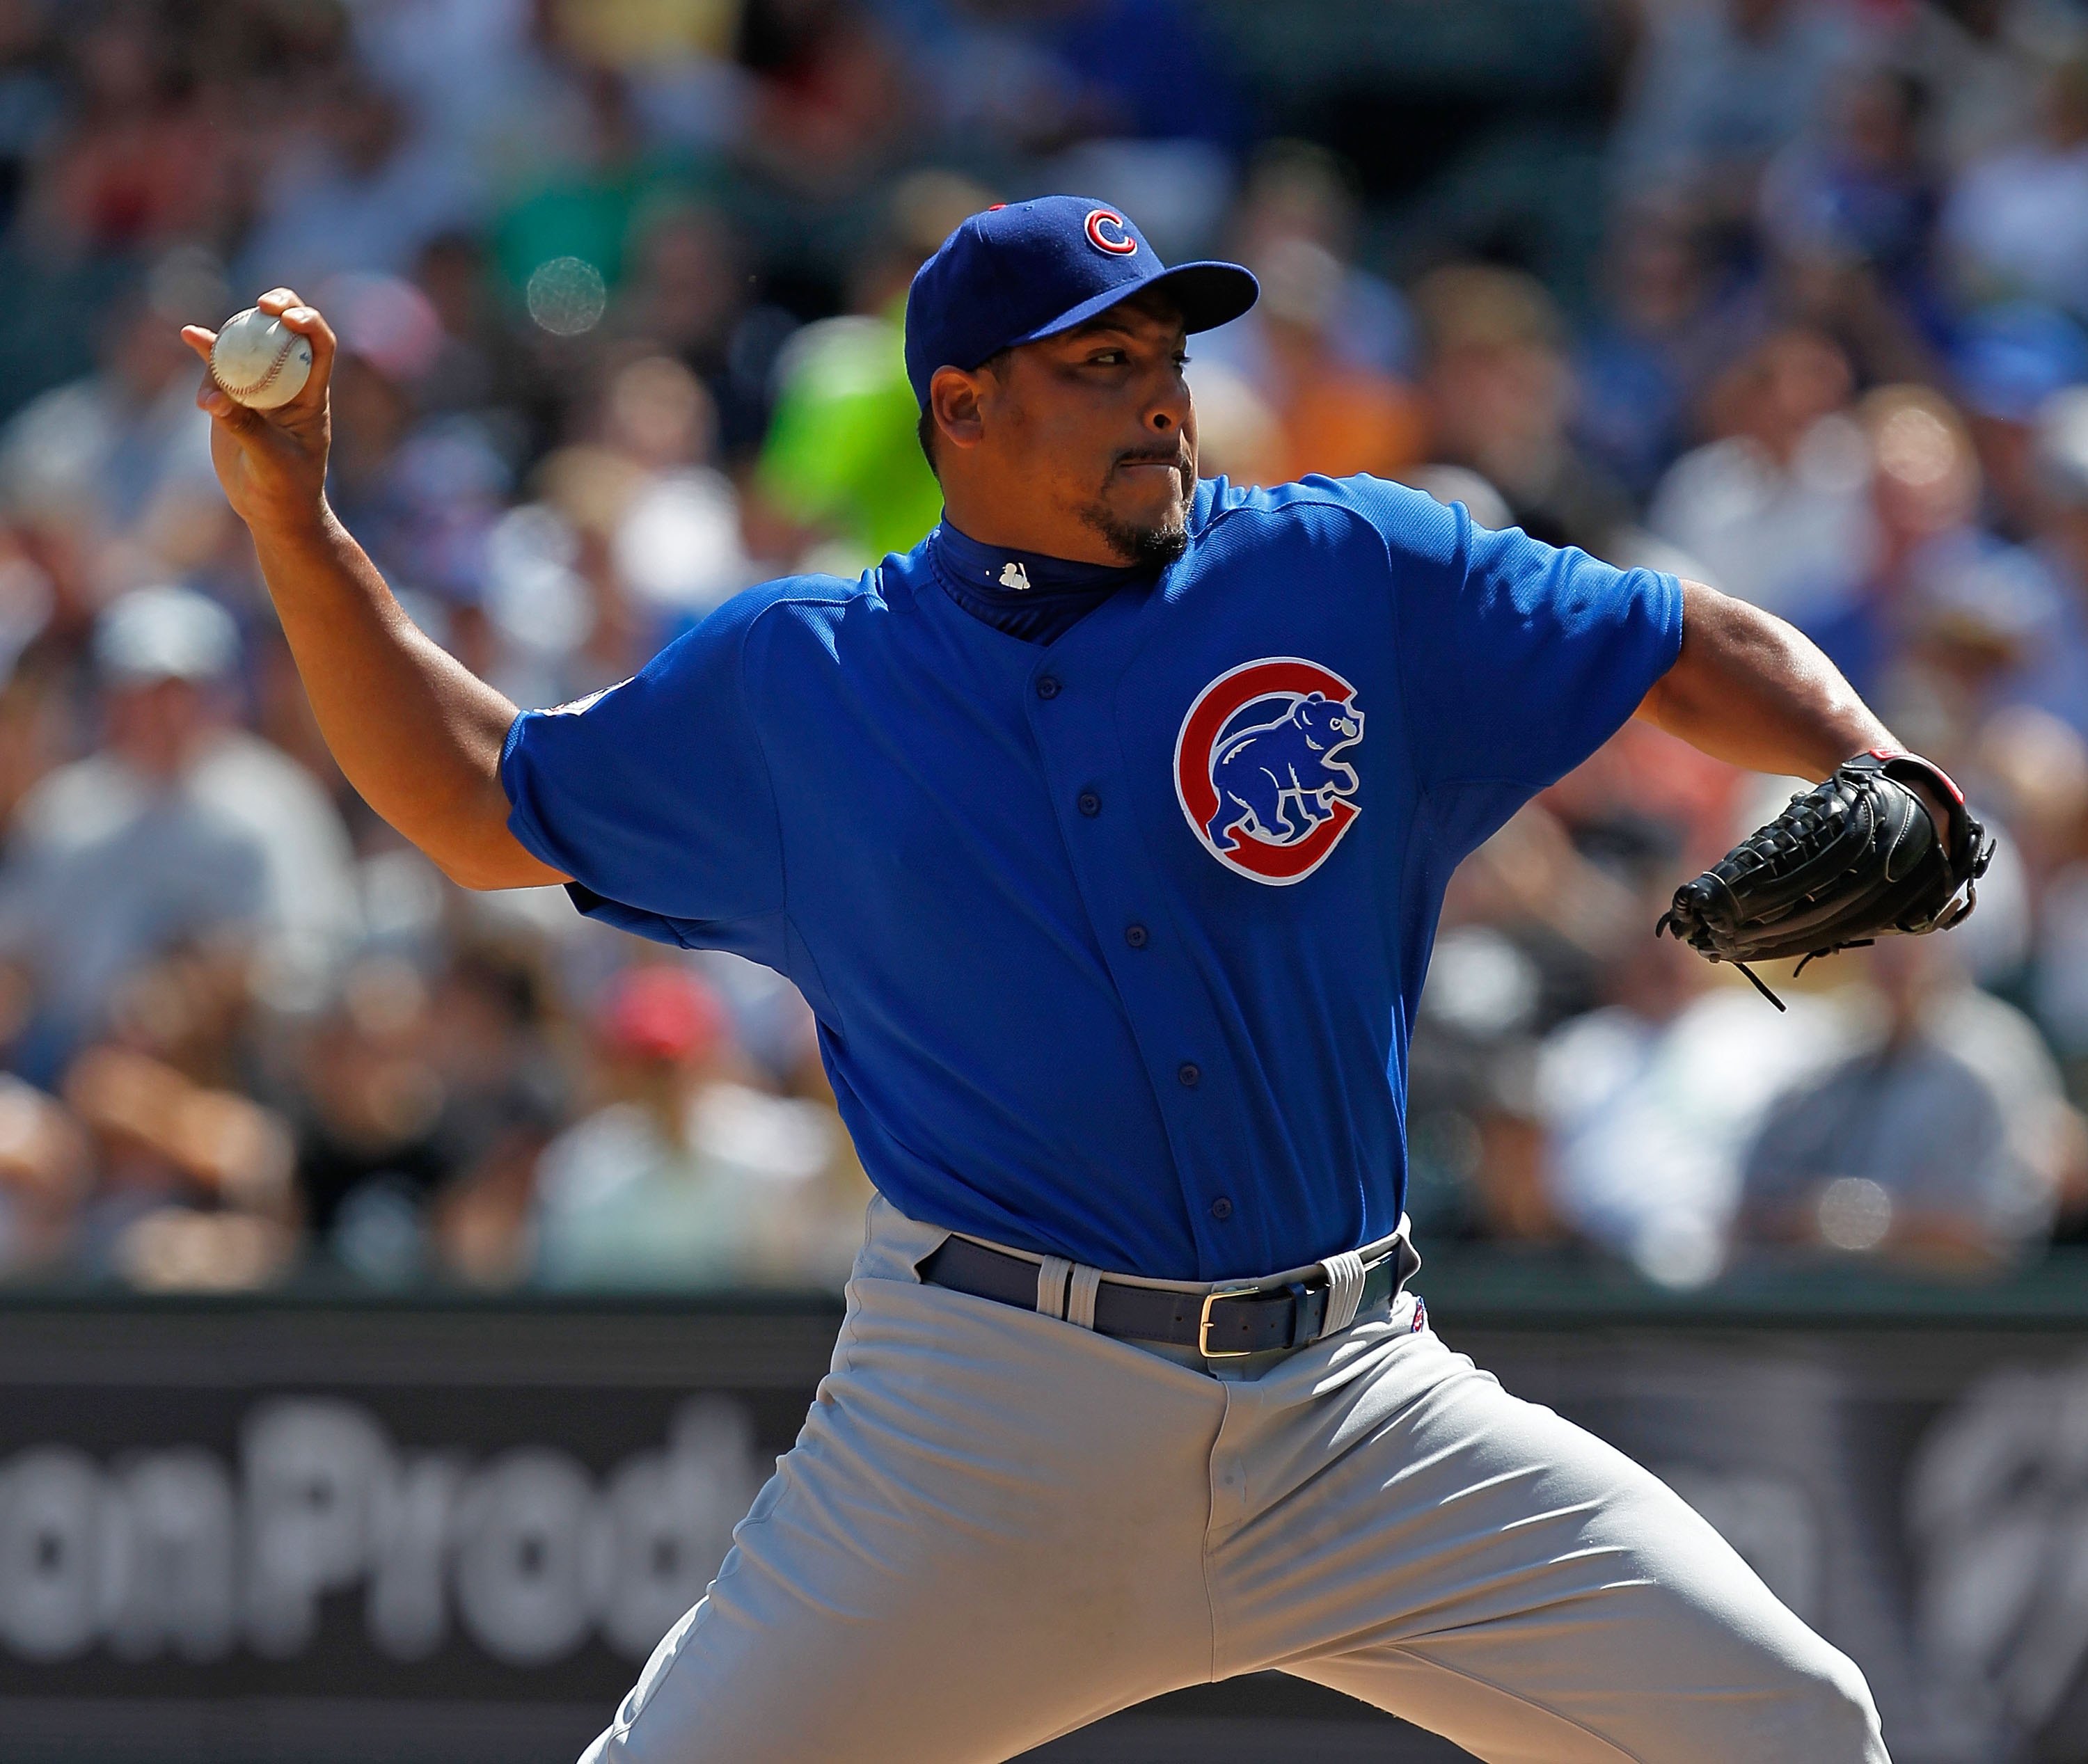 Cubs' Zambrano Shows Possible Path for Mets' Rodriguez - The New York Times